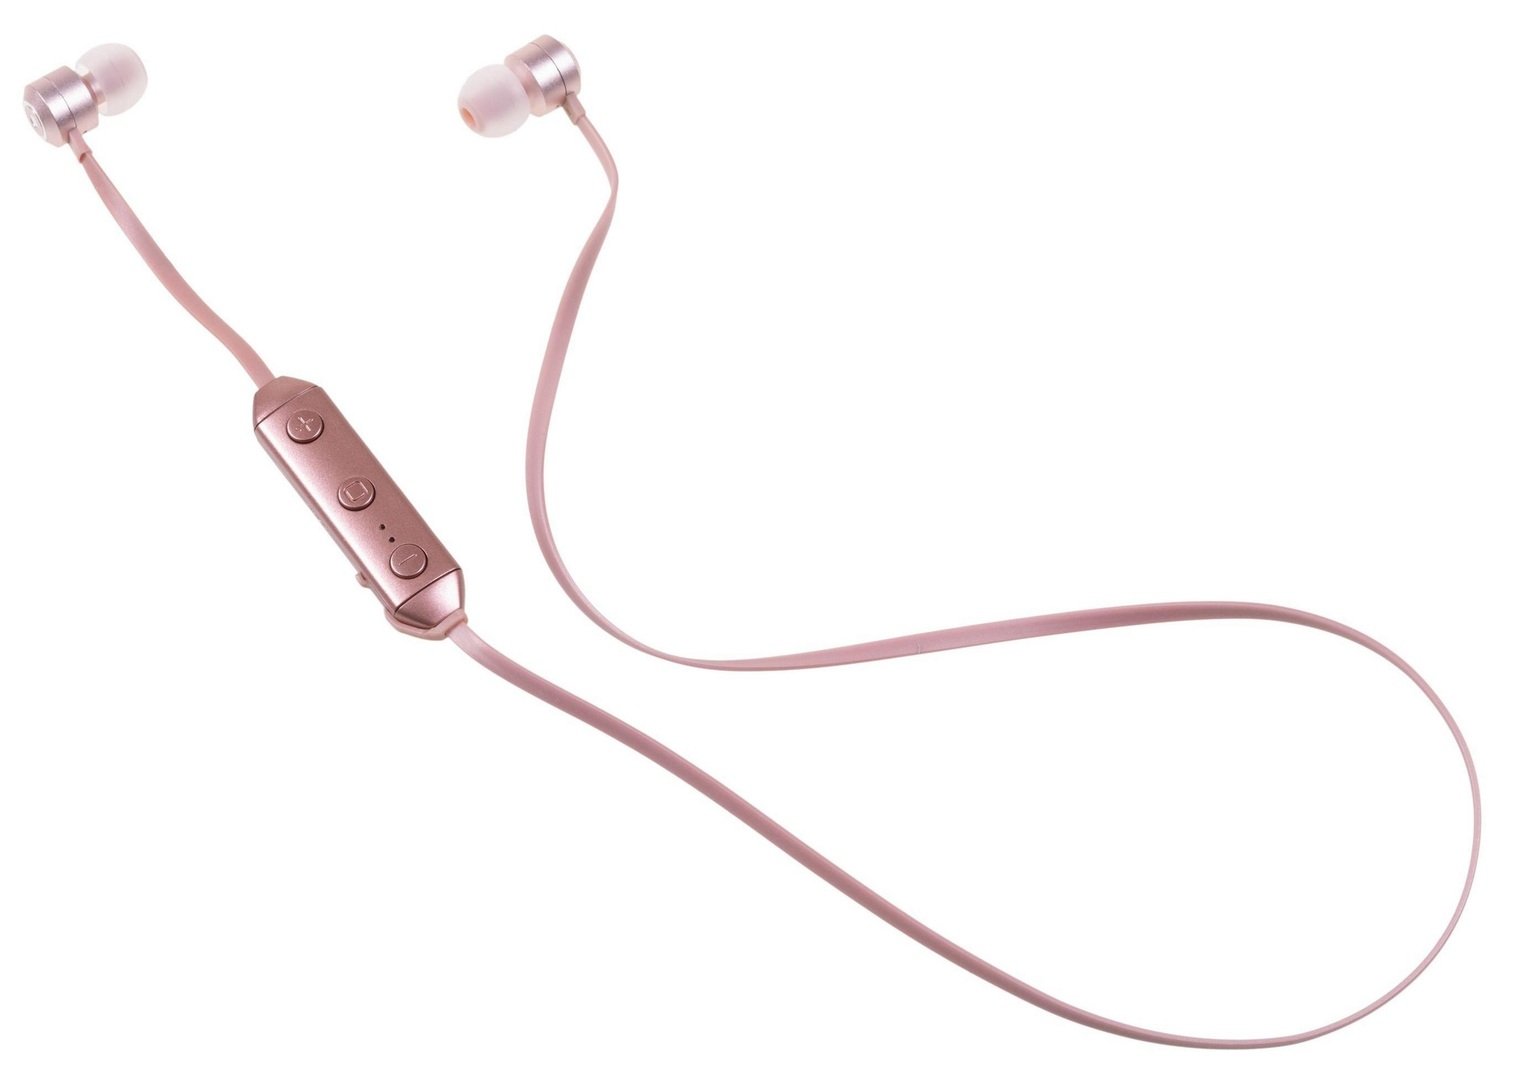 KitSound Ribbons Wireless In-Ear Headphones - Rose Gold